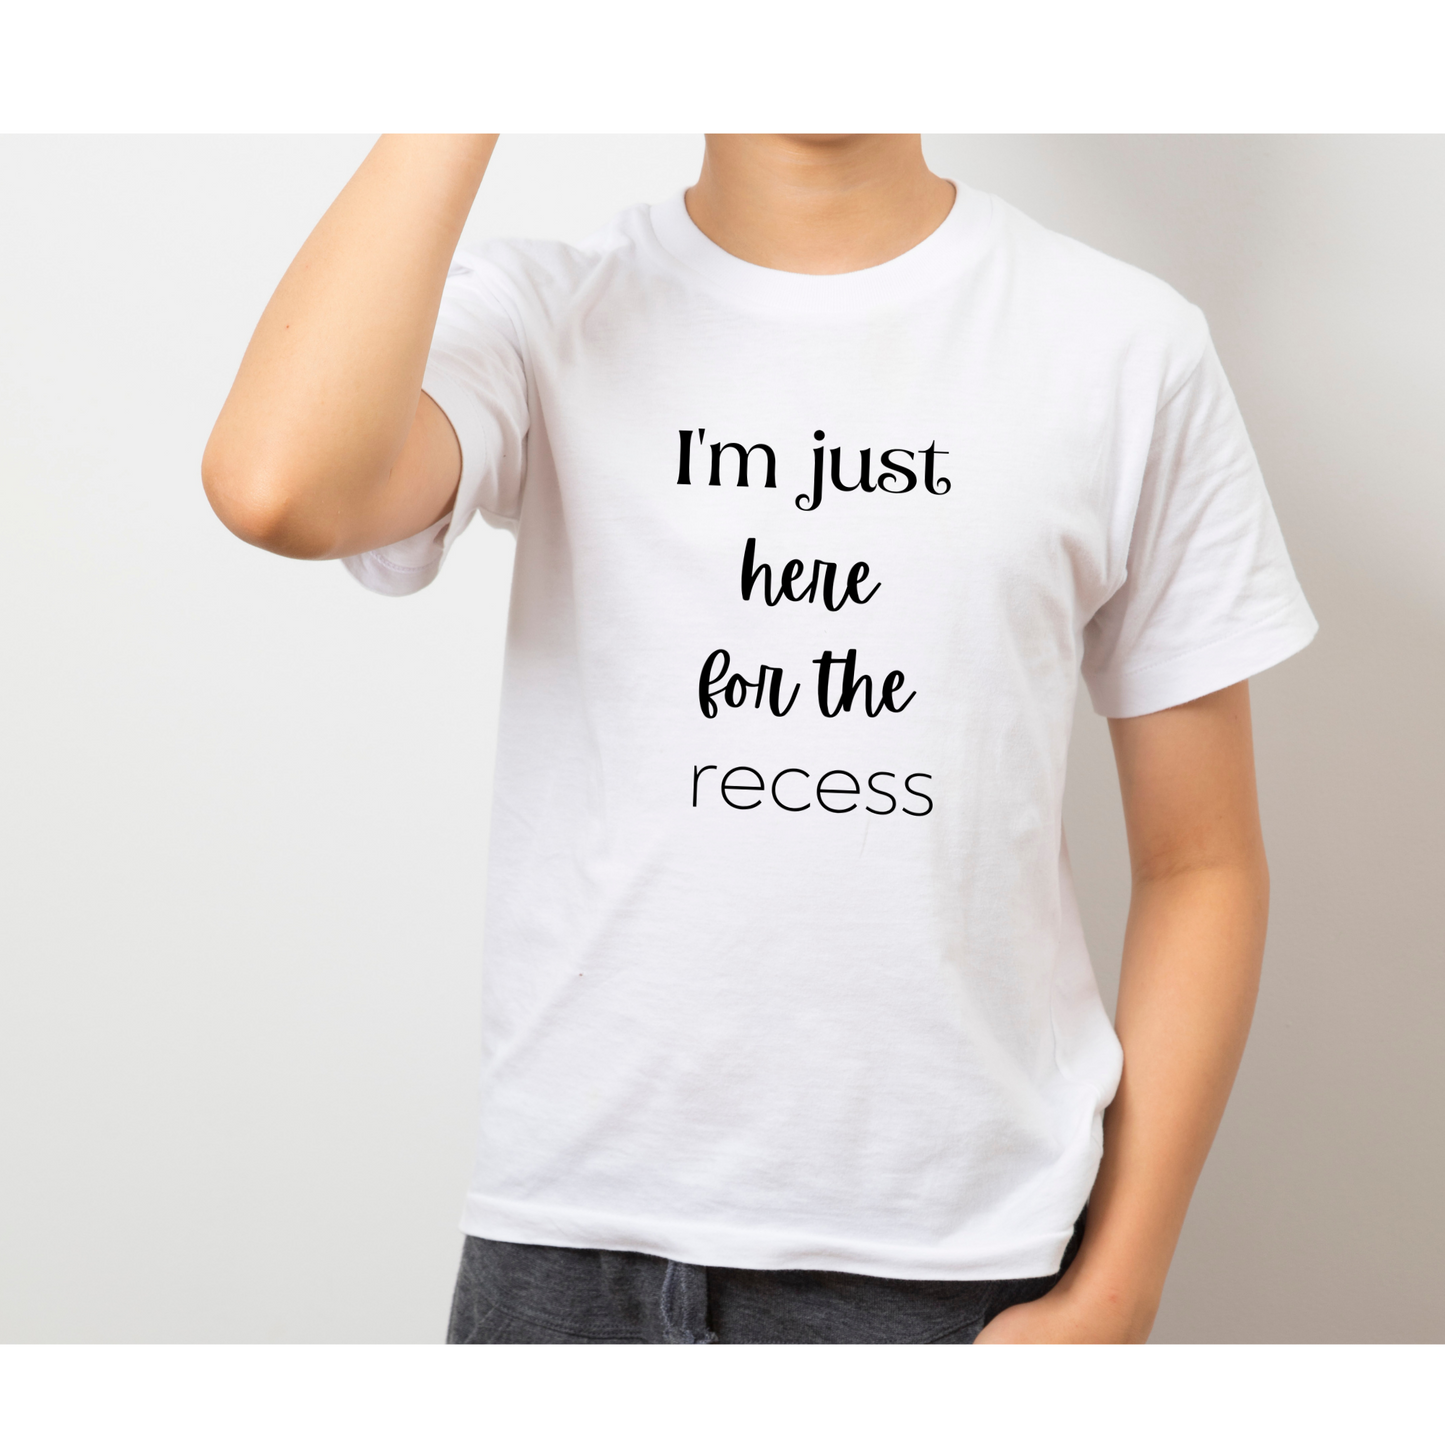 I'm just here for the recess personalized funny first day of school T-Shirt | Back to school outfit |Unisex Size T-shirt